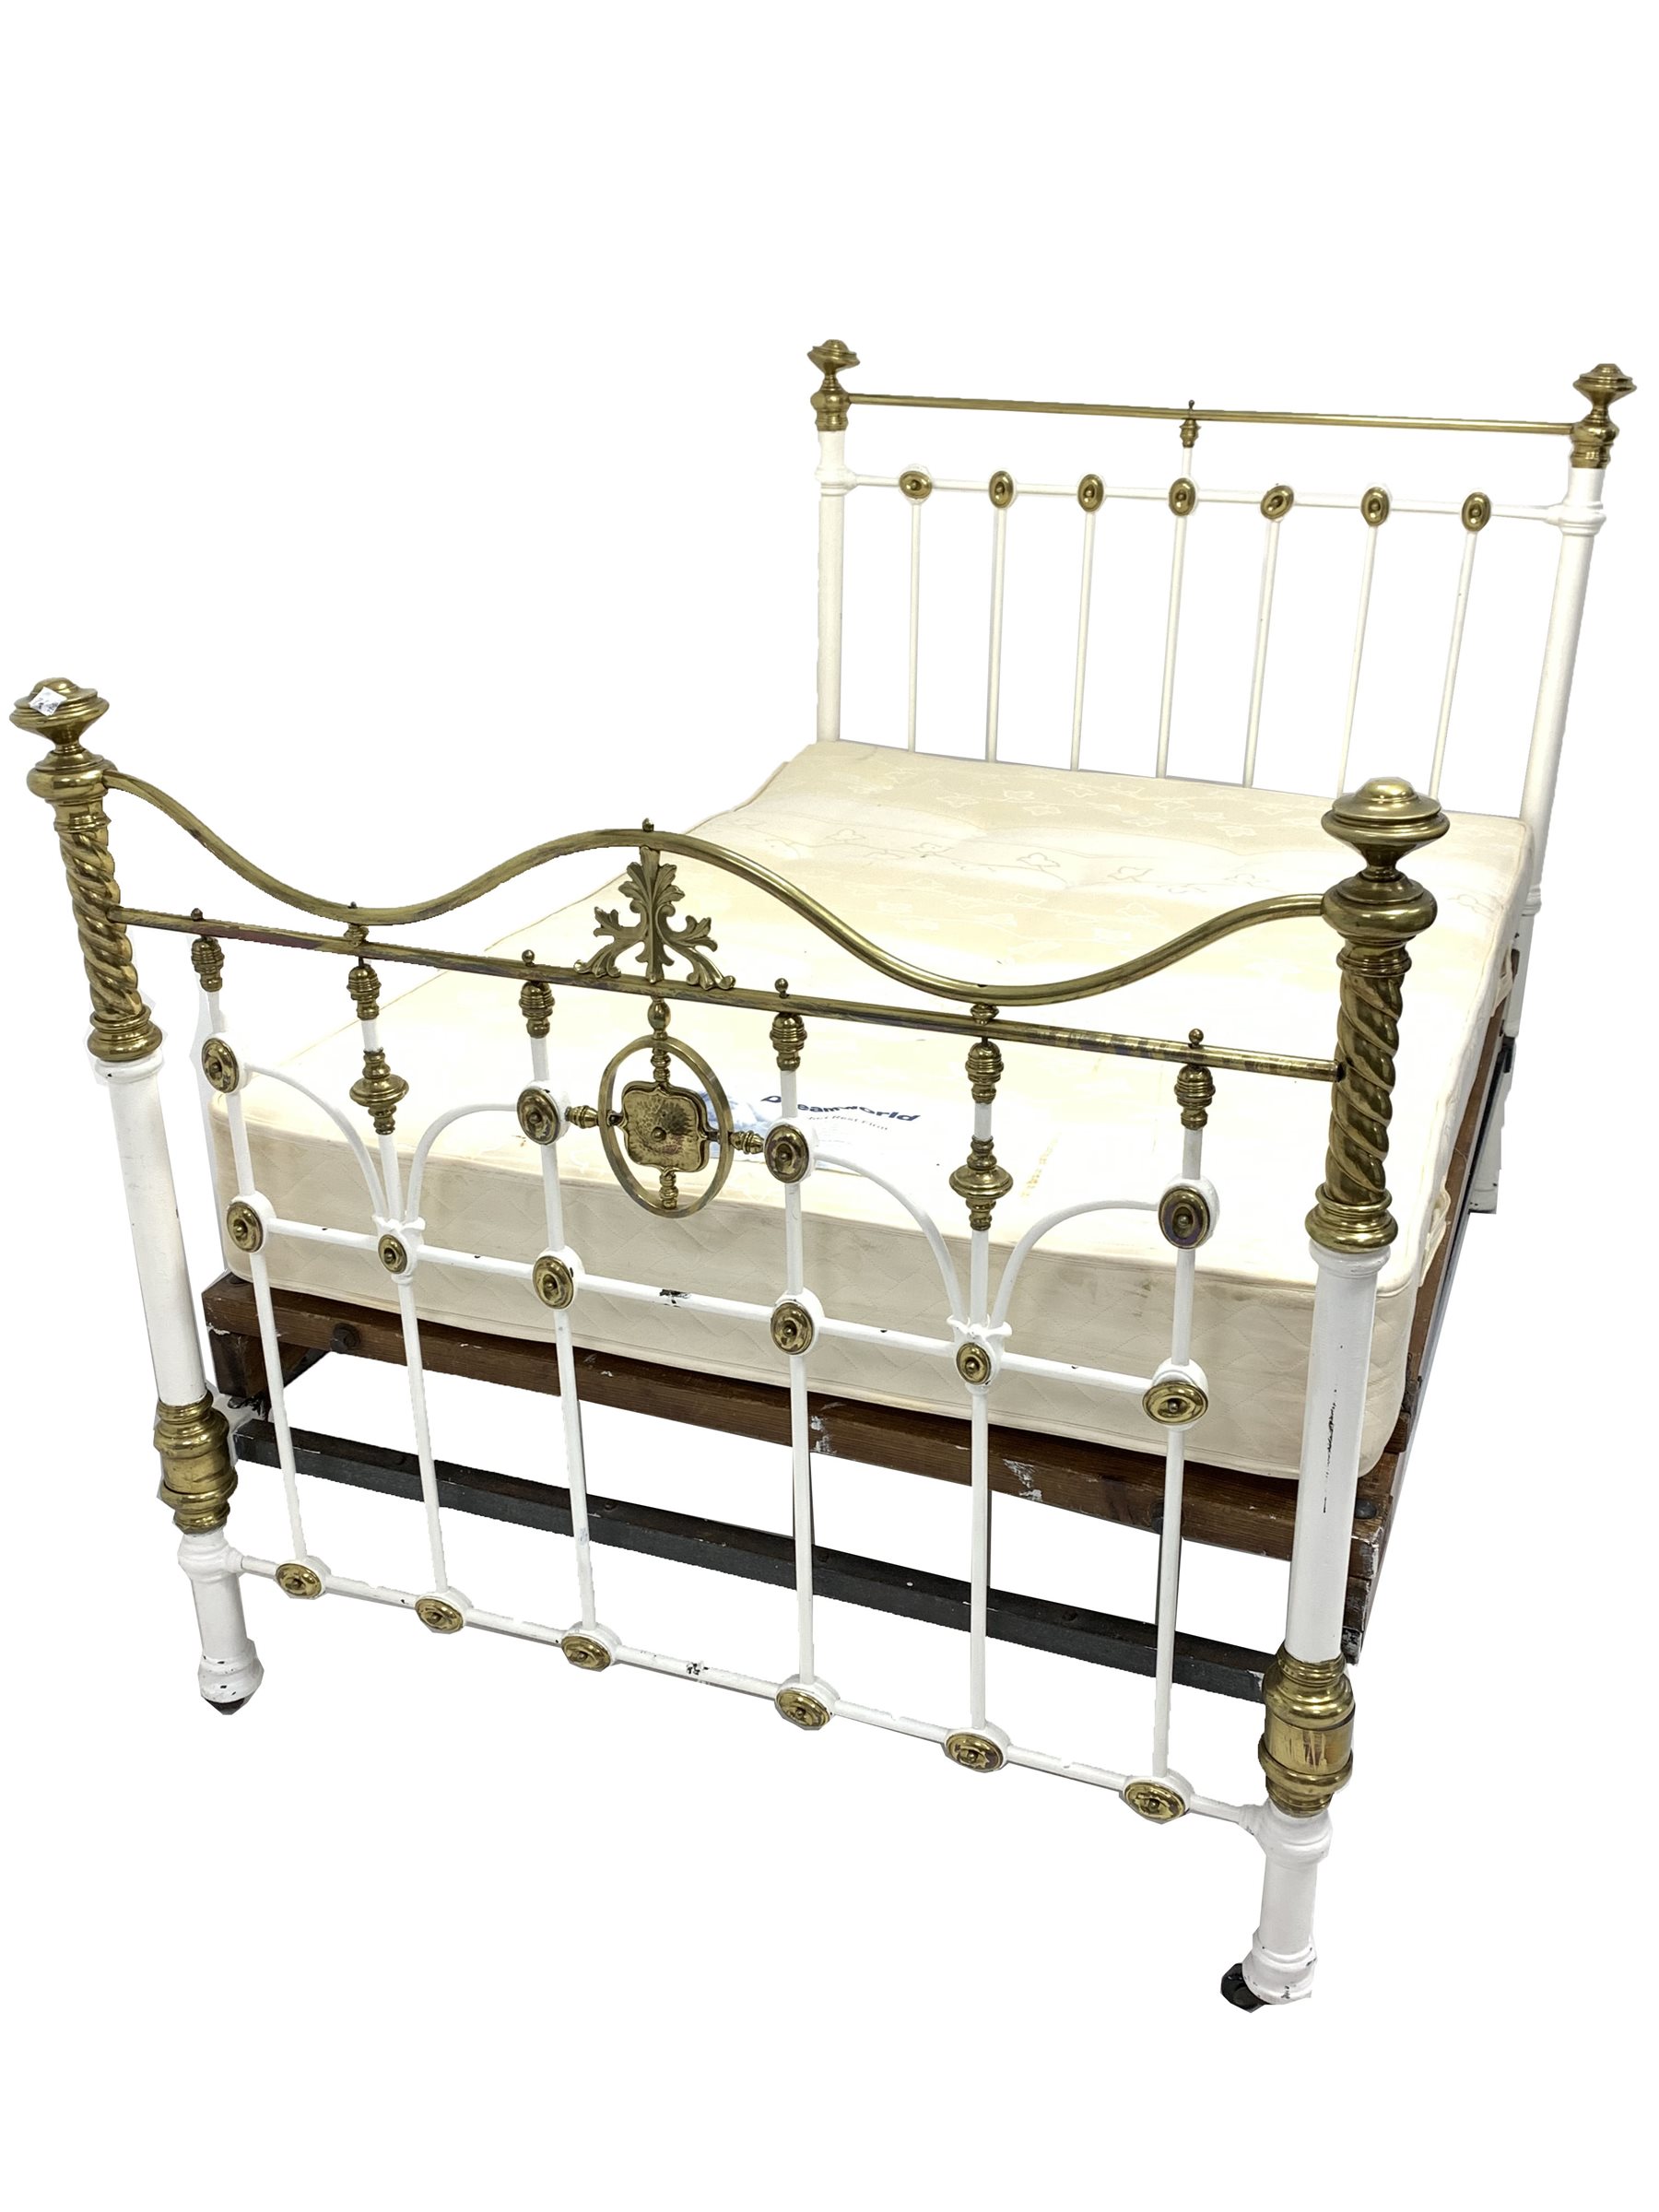 Victorian white painted iron and brass double bedstead, with cast spiral and leaf decoration, raised